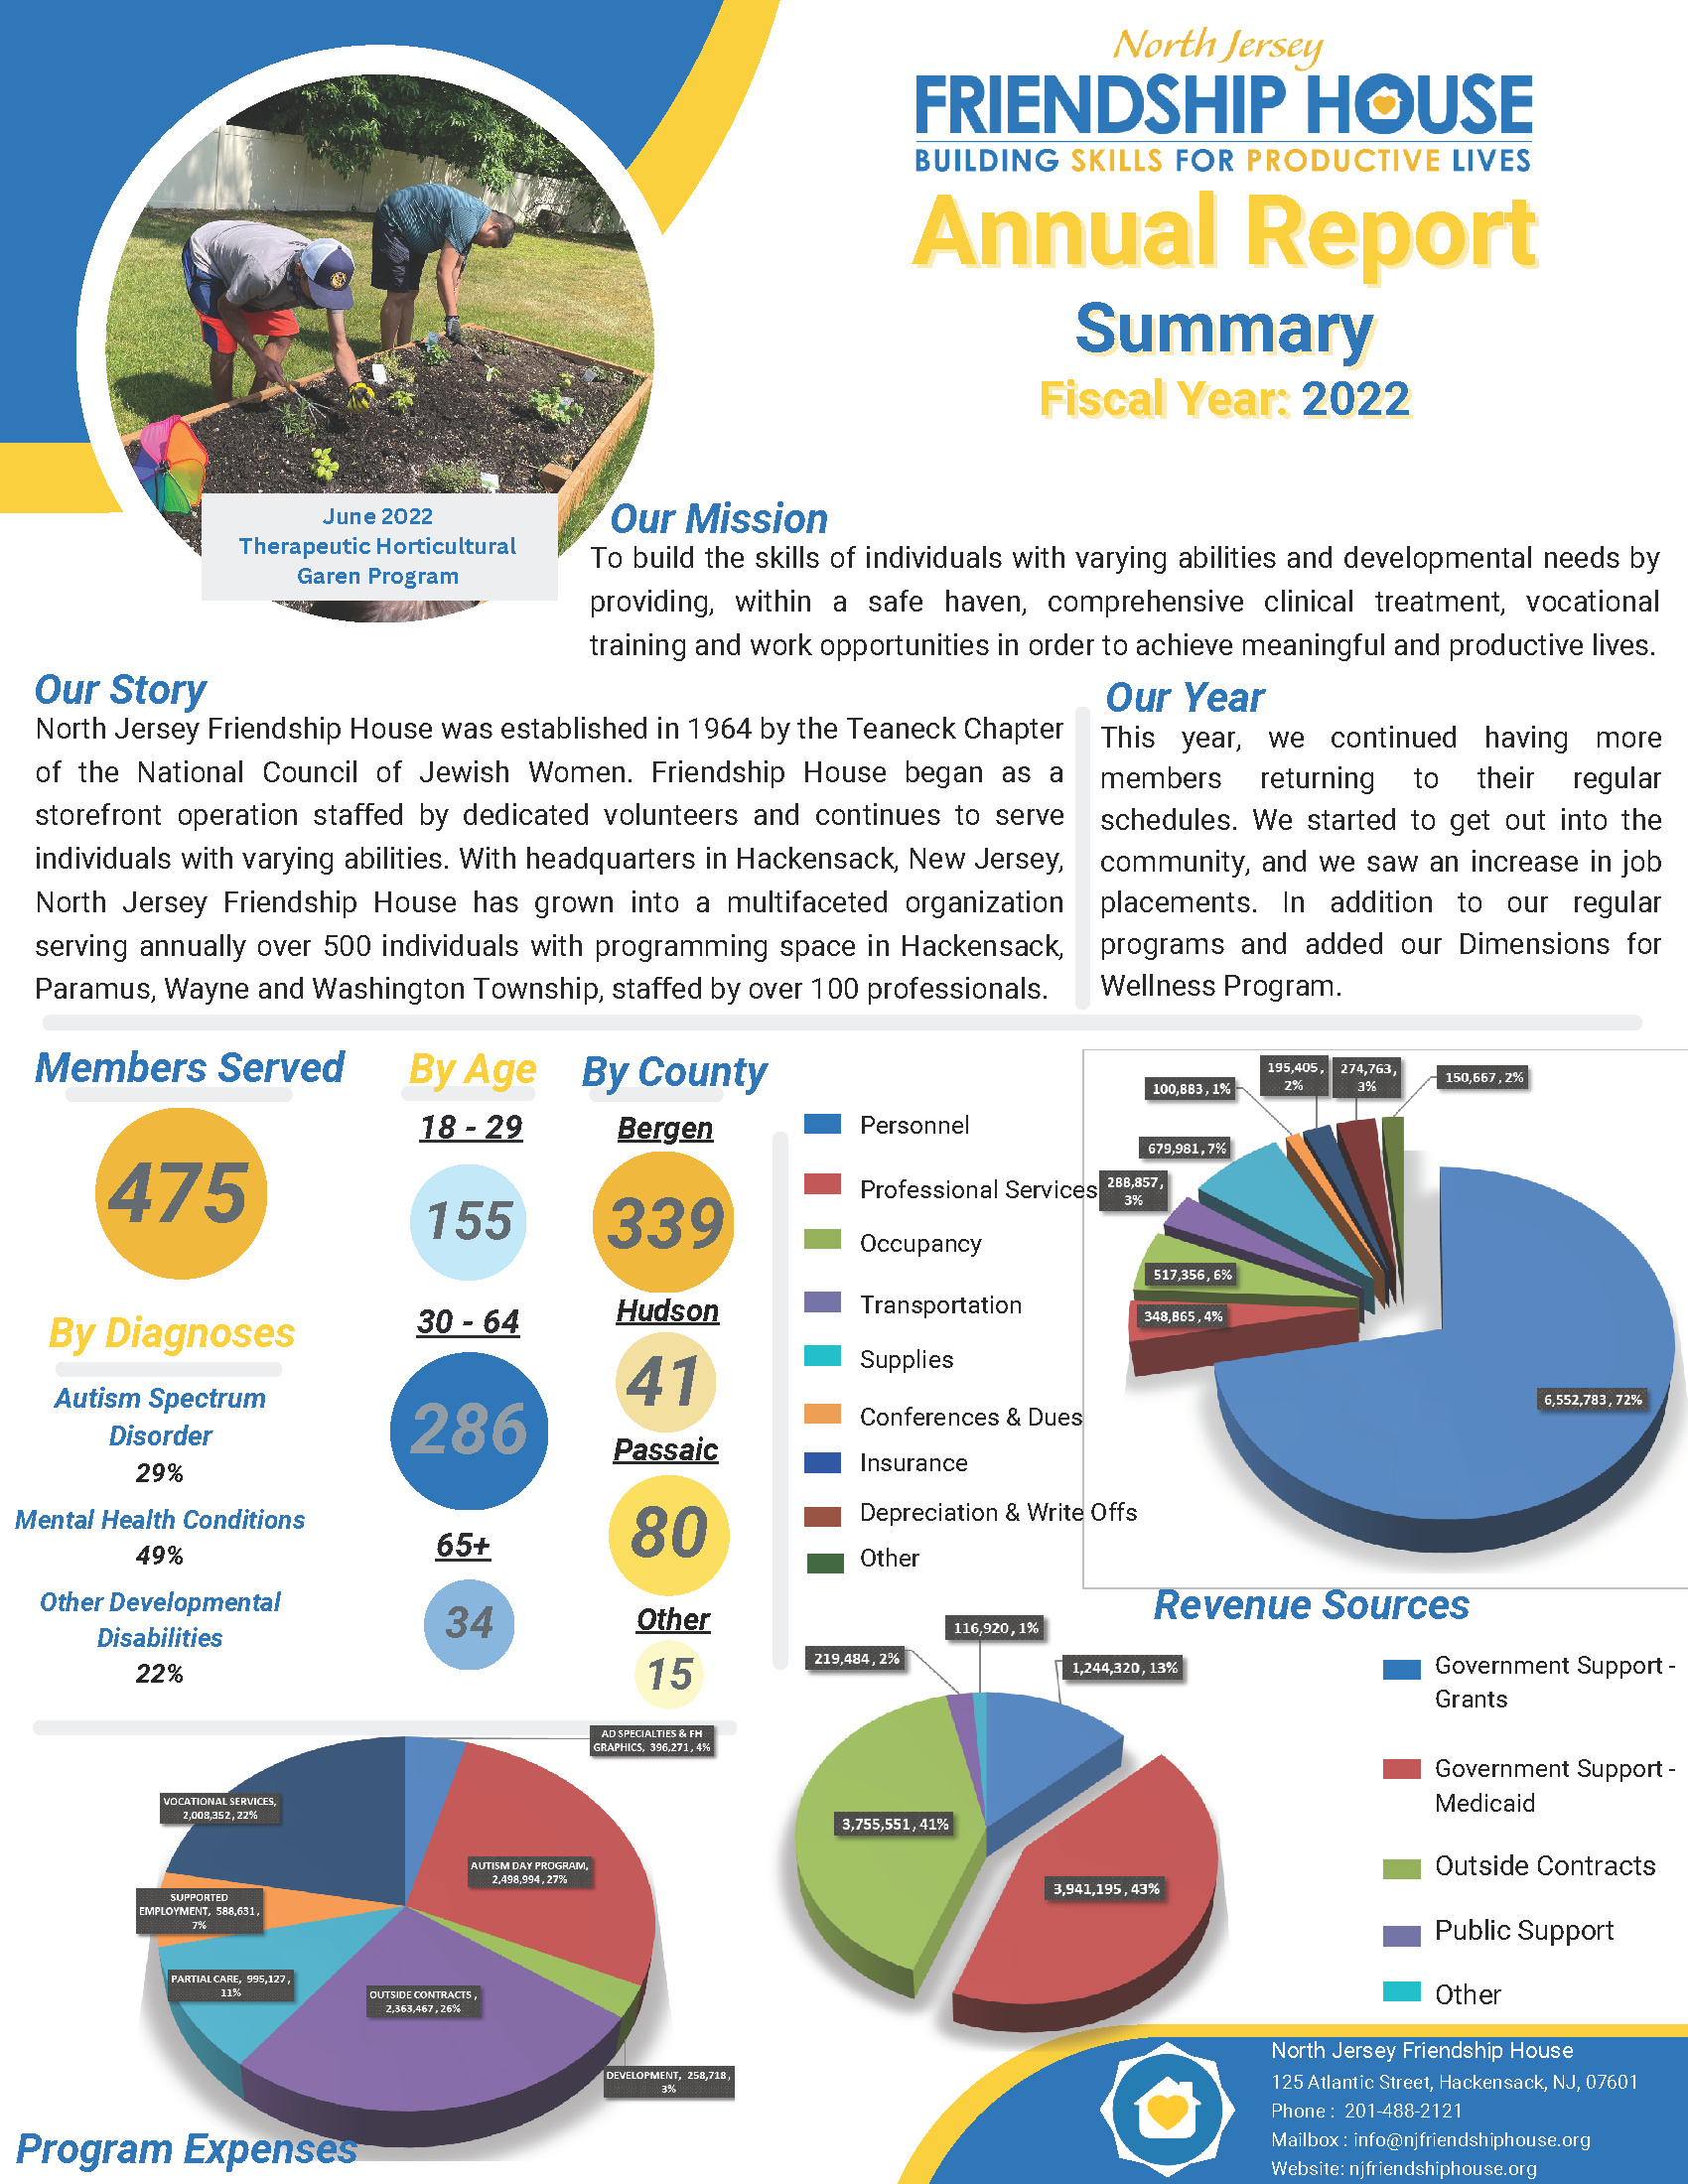 North Jersey Friendship House Annual Report – Fiscal Year 2022